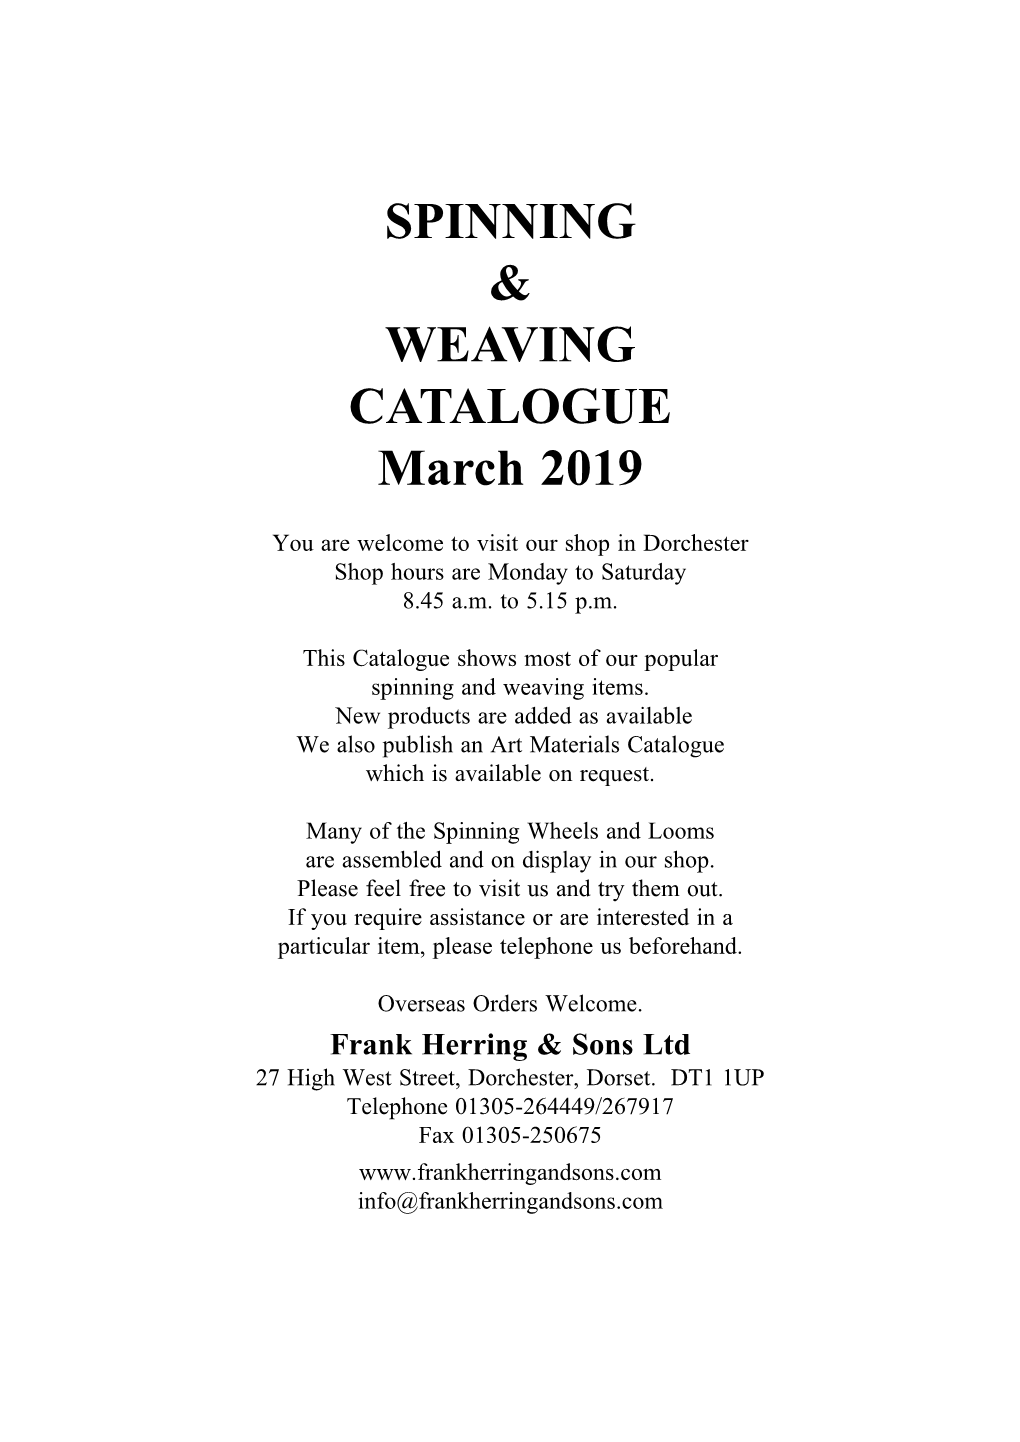 SPINNING & WEAVING CATALOGUE March 2019